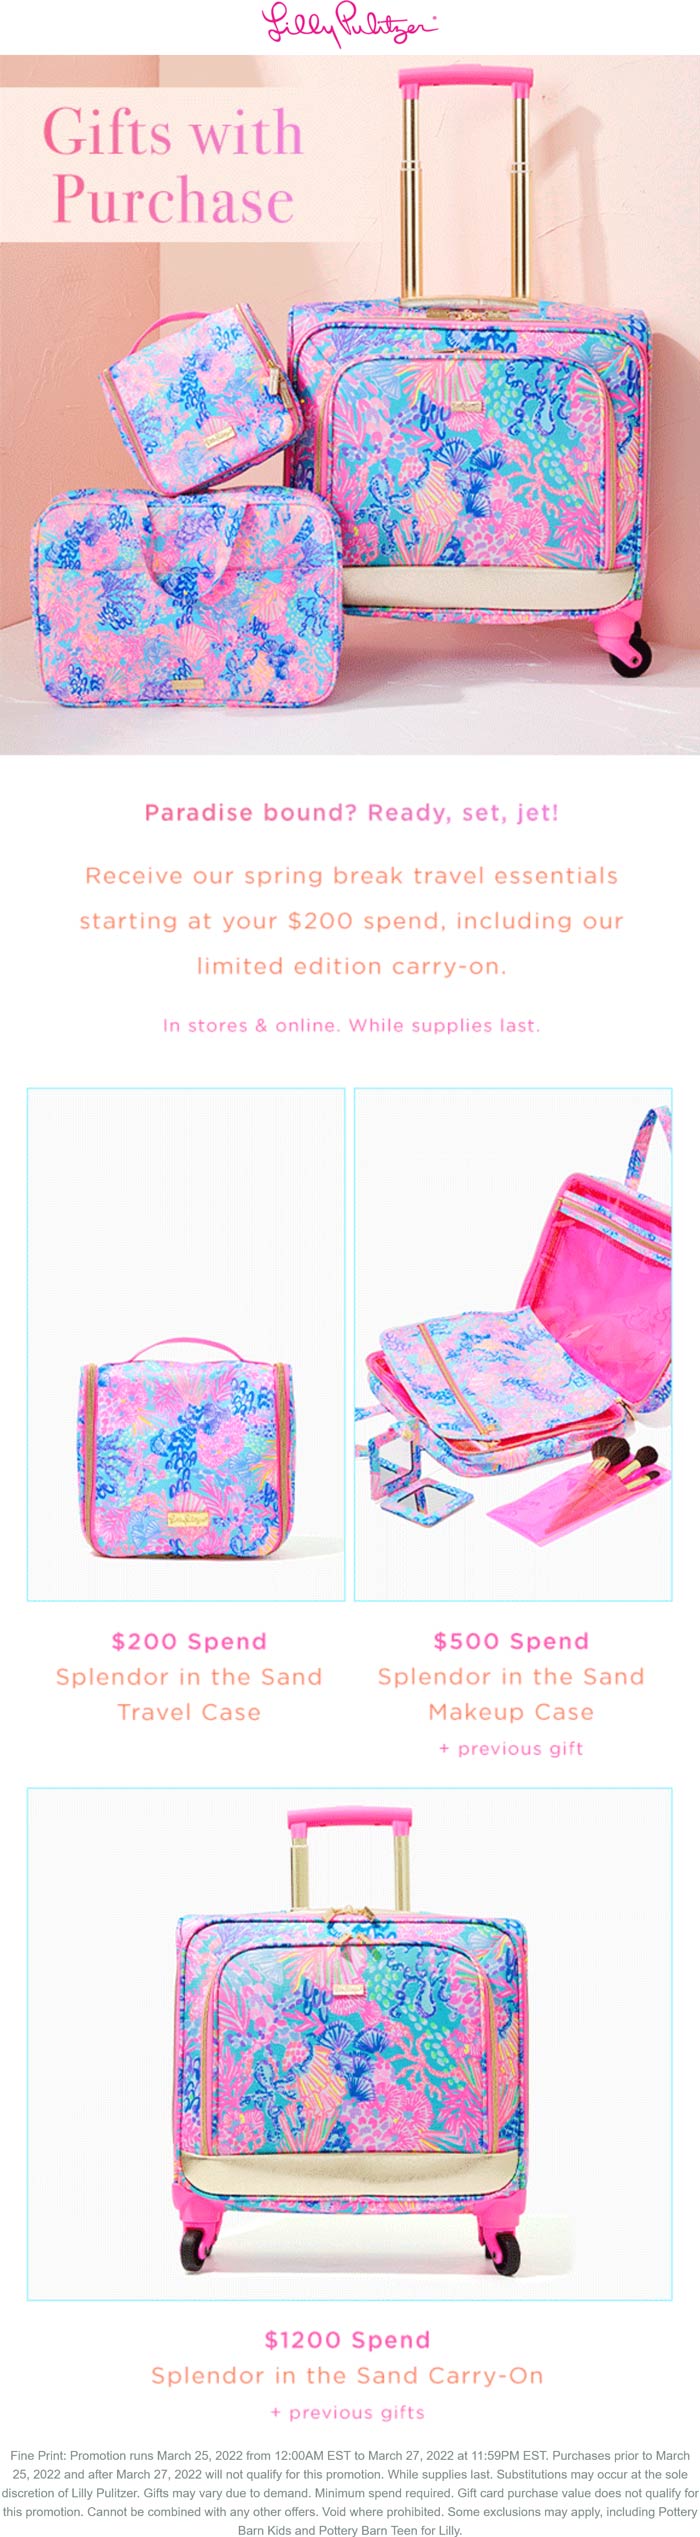 Lilly Pulitzer stores Coupon  Various free gifts on $200+ this weekend at Lilly Pulitzer, ditto online #lillypulitzer 